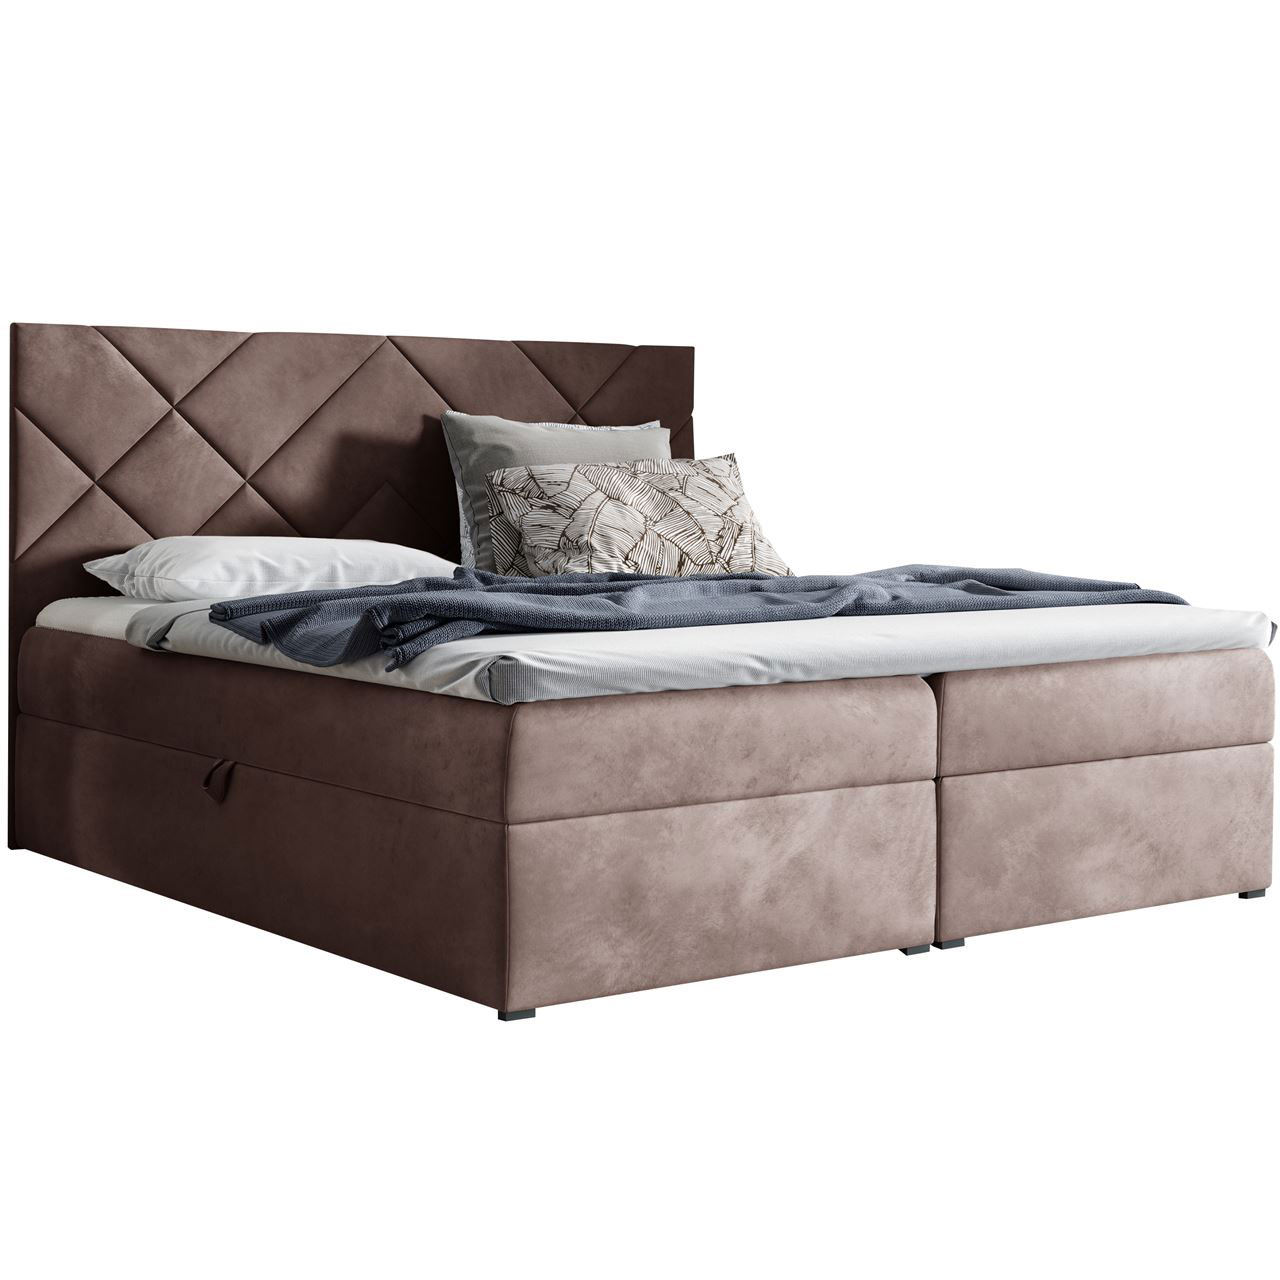 Upholstered bed PEONIA 200x200 fresh 09